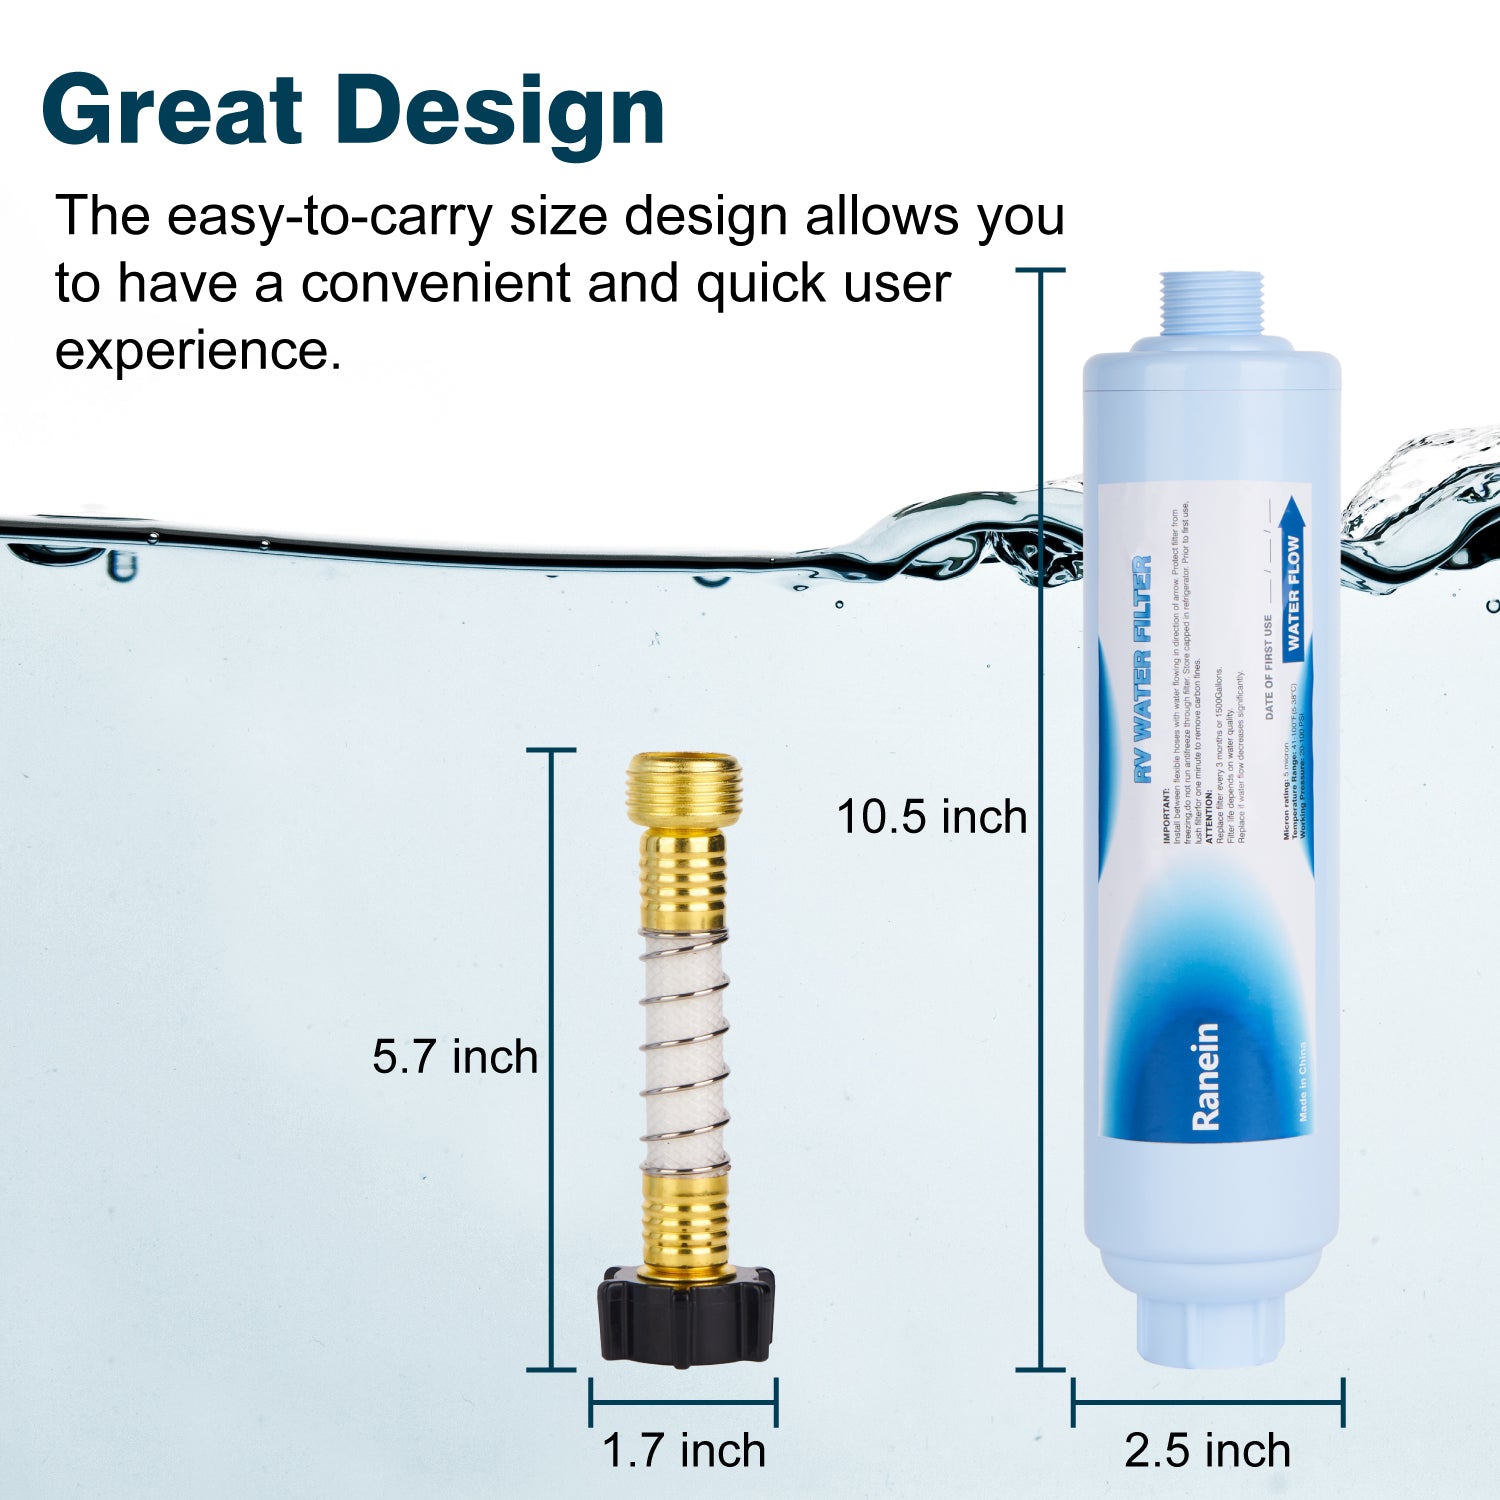 RANEIN RV Water Filter with Hose Protector, Inline Water Filter Reduces Bad Taste, Chlorine, Odor and Sediment, for RVs, Campers, Travel Trailers, Boats